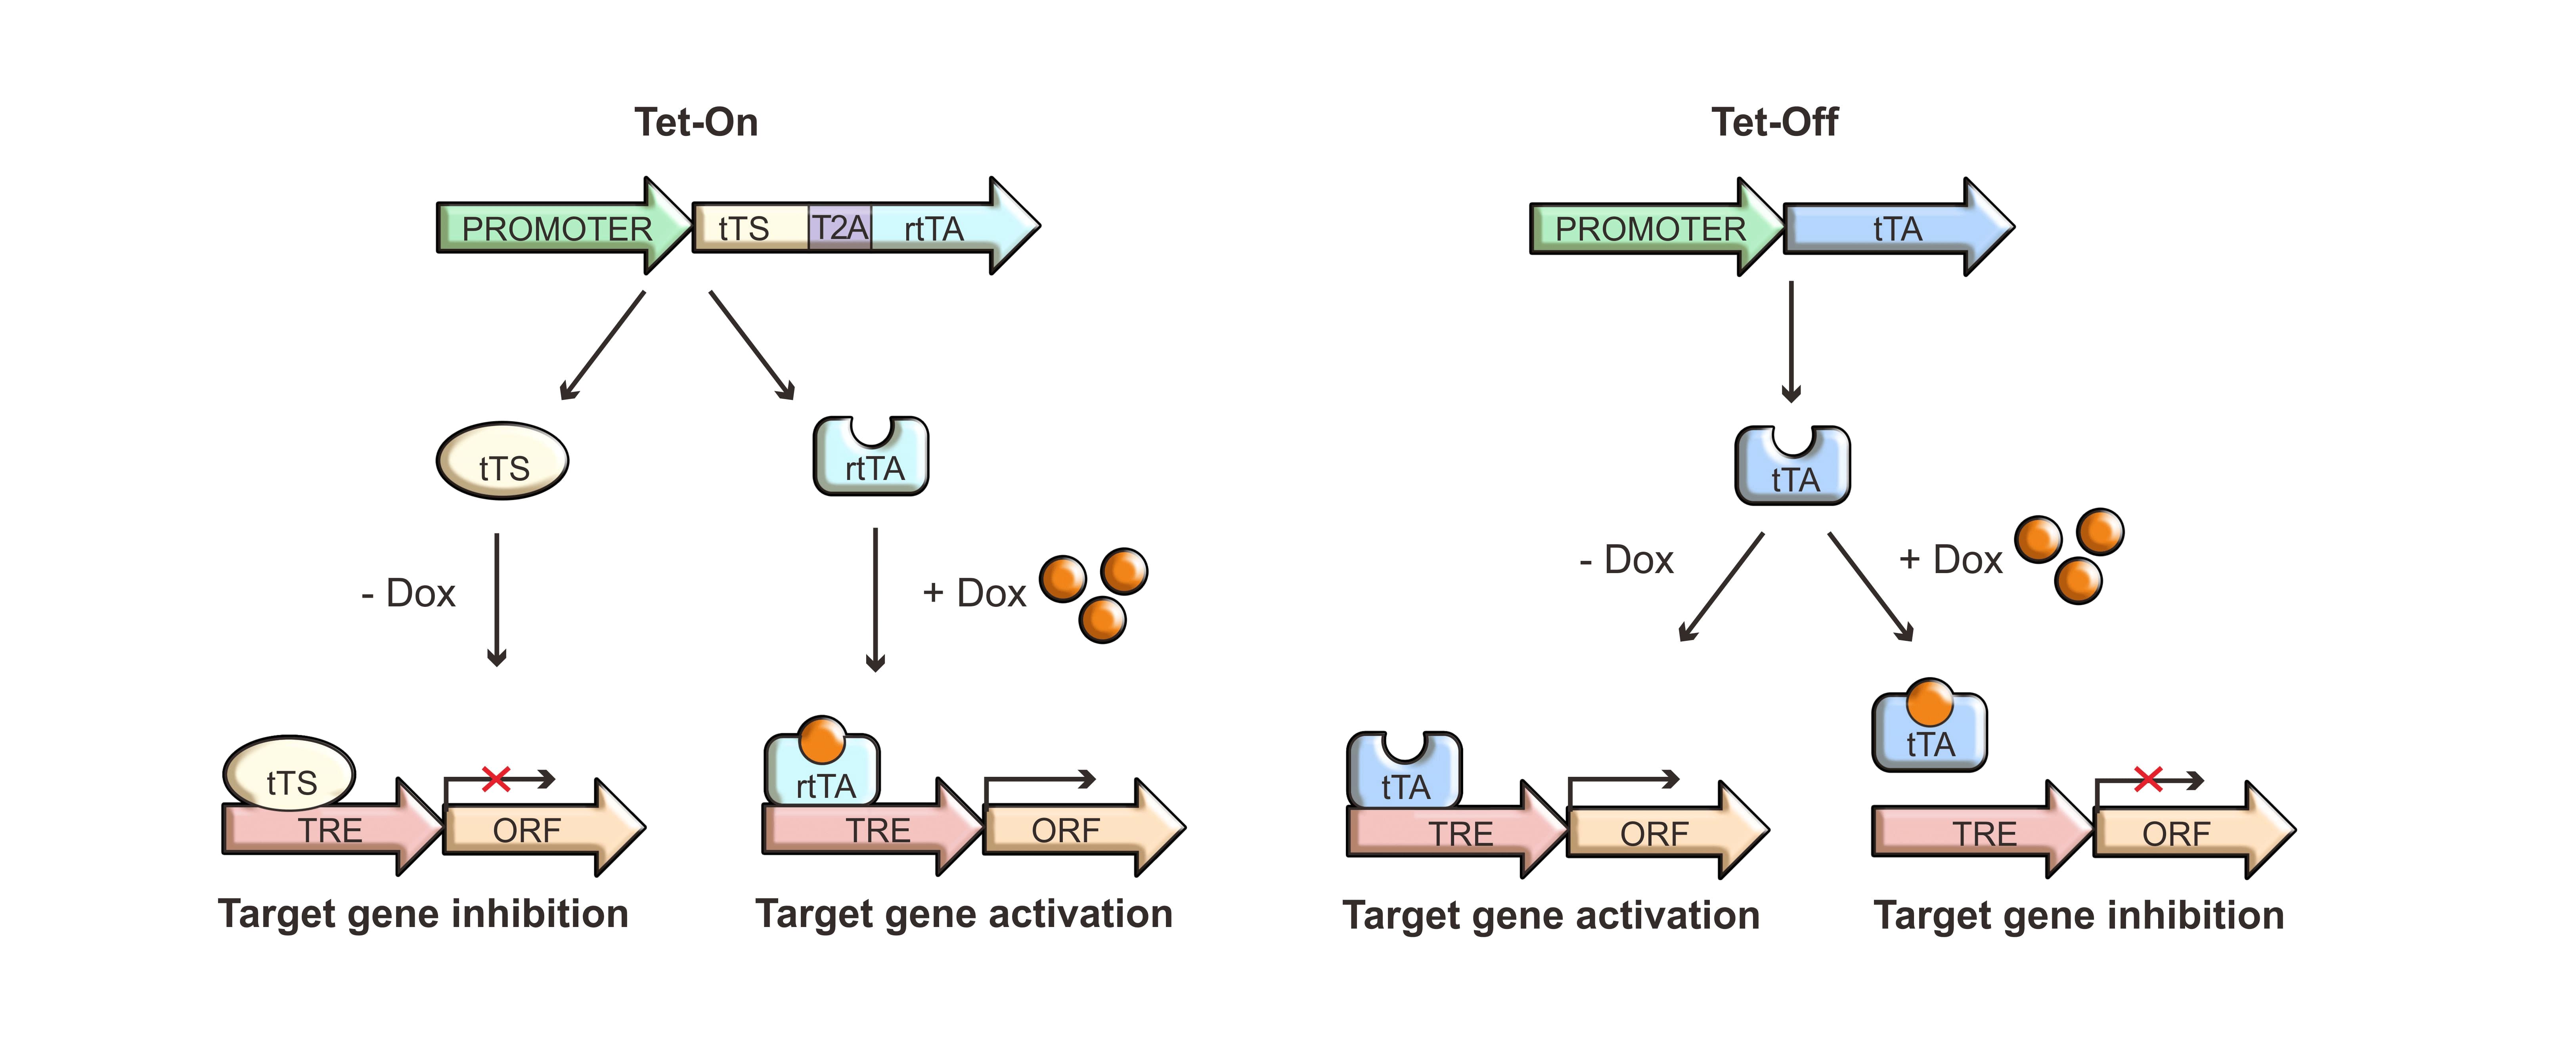 Using Tet-on and Tet-off systems to inhibit/activate target genes via applying doxycycline.